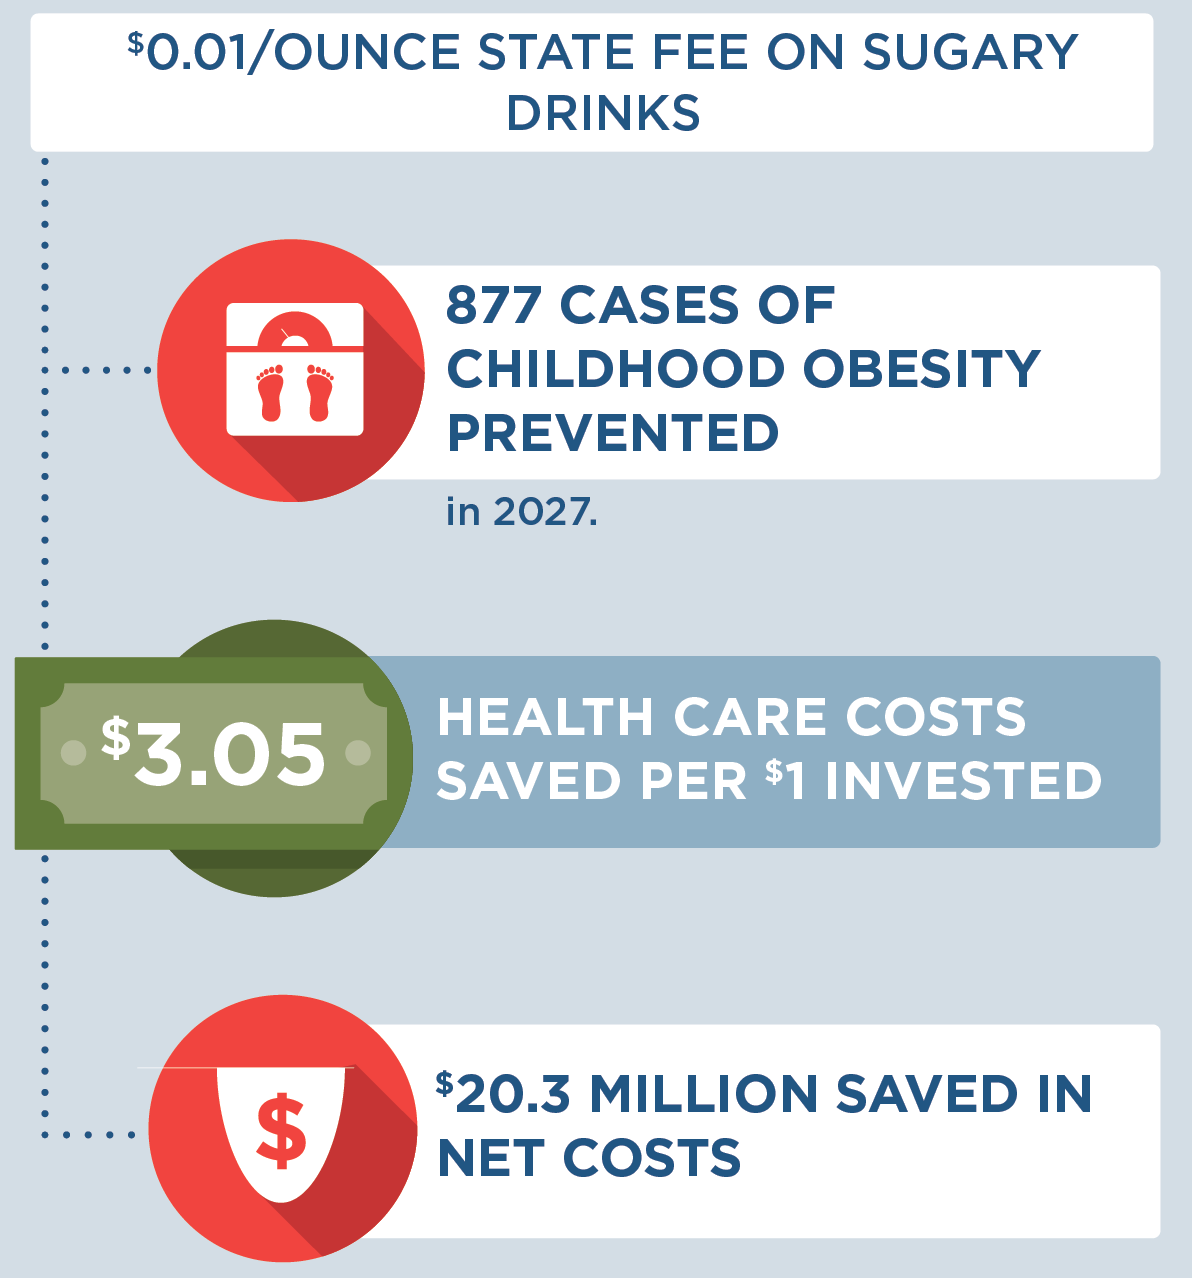 An infographic of results after the 1 cent state fee on sugary drinks.